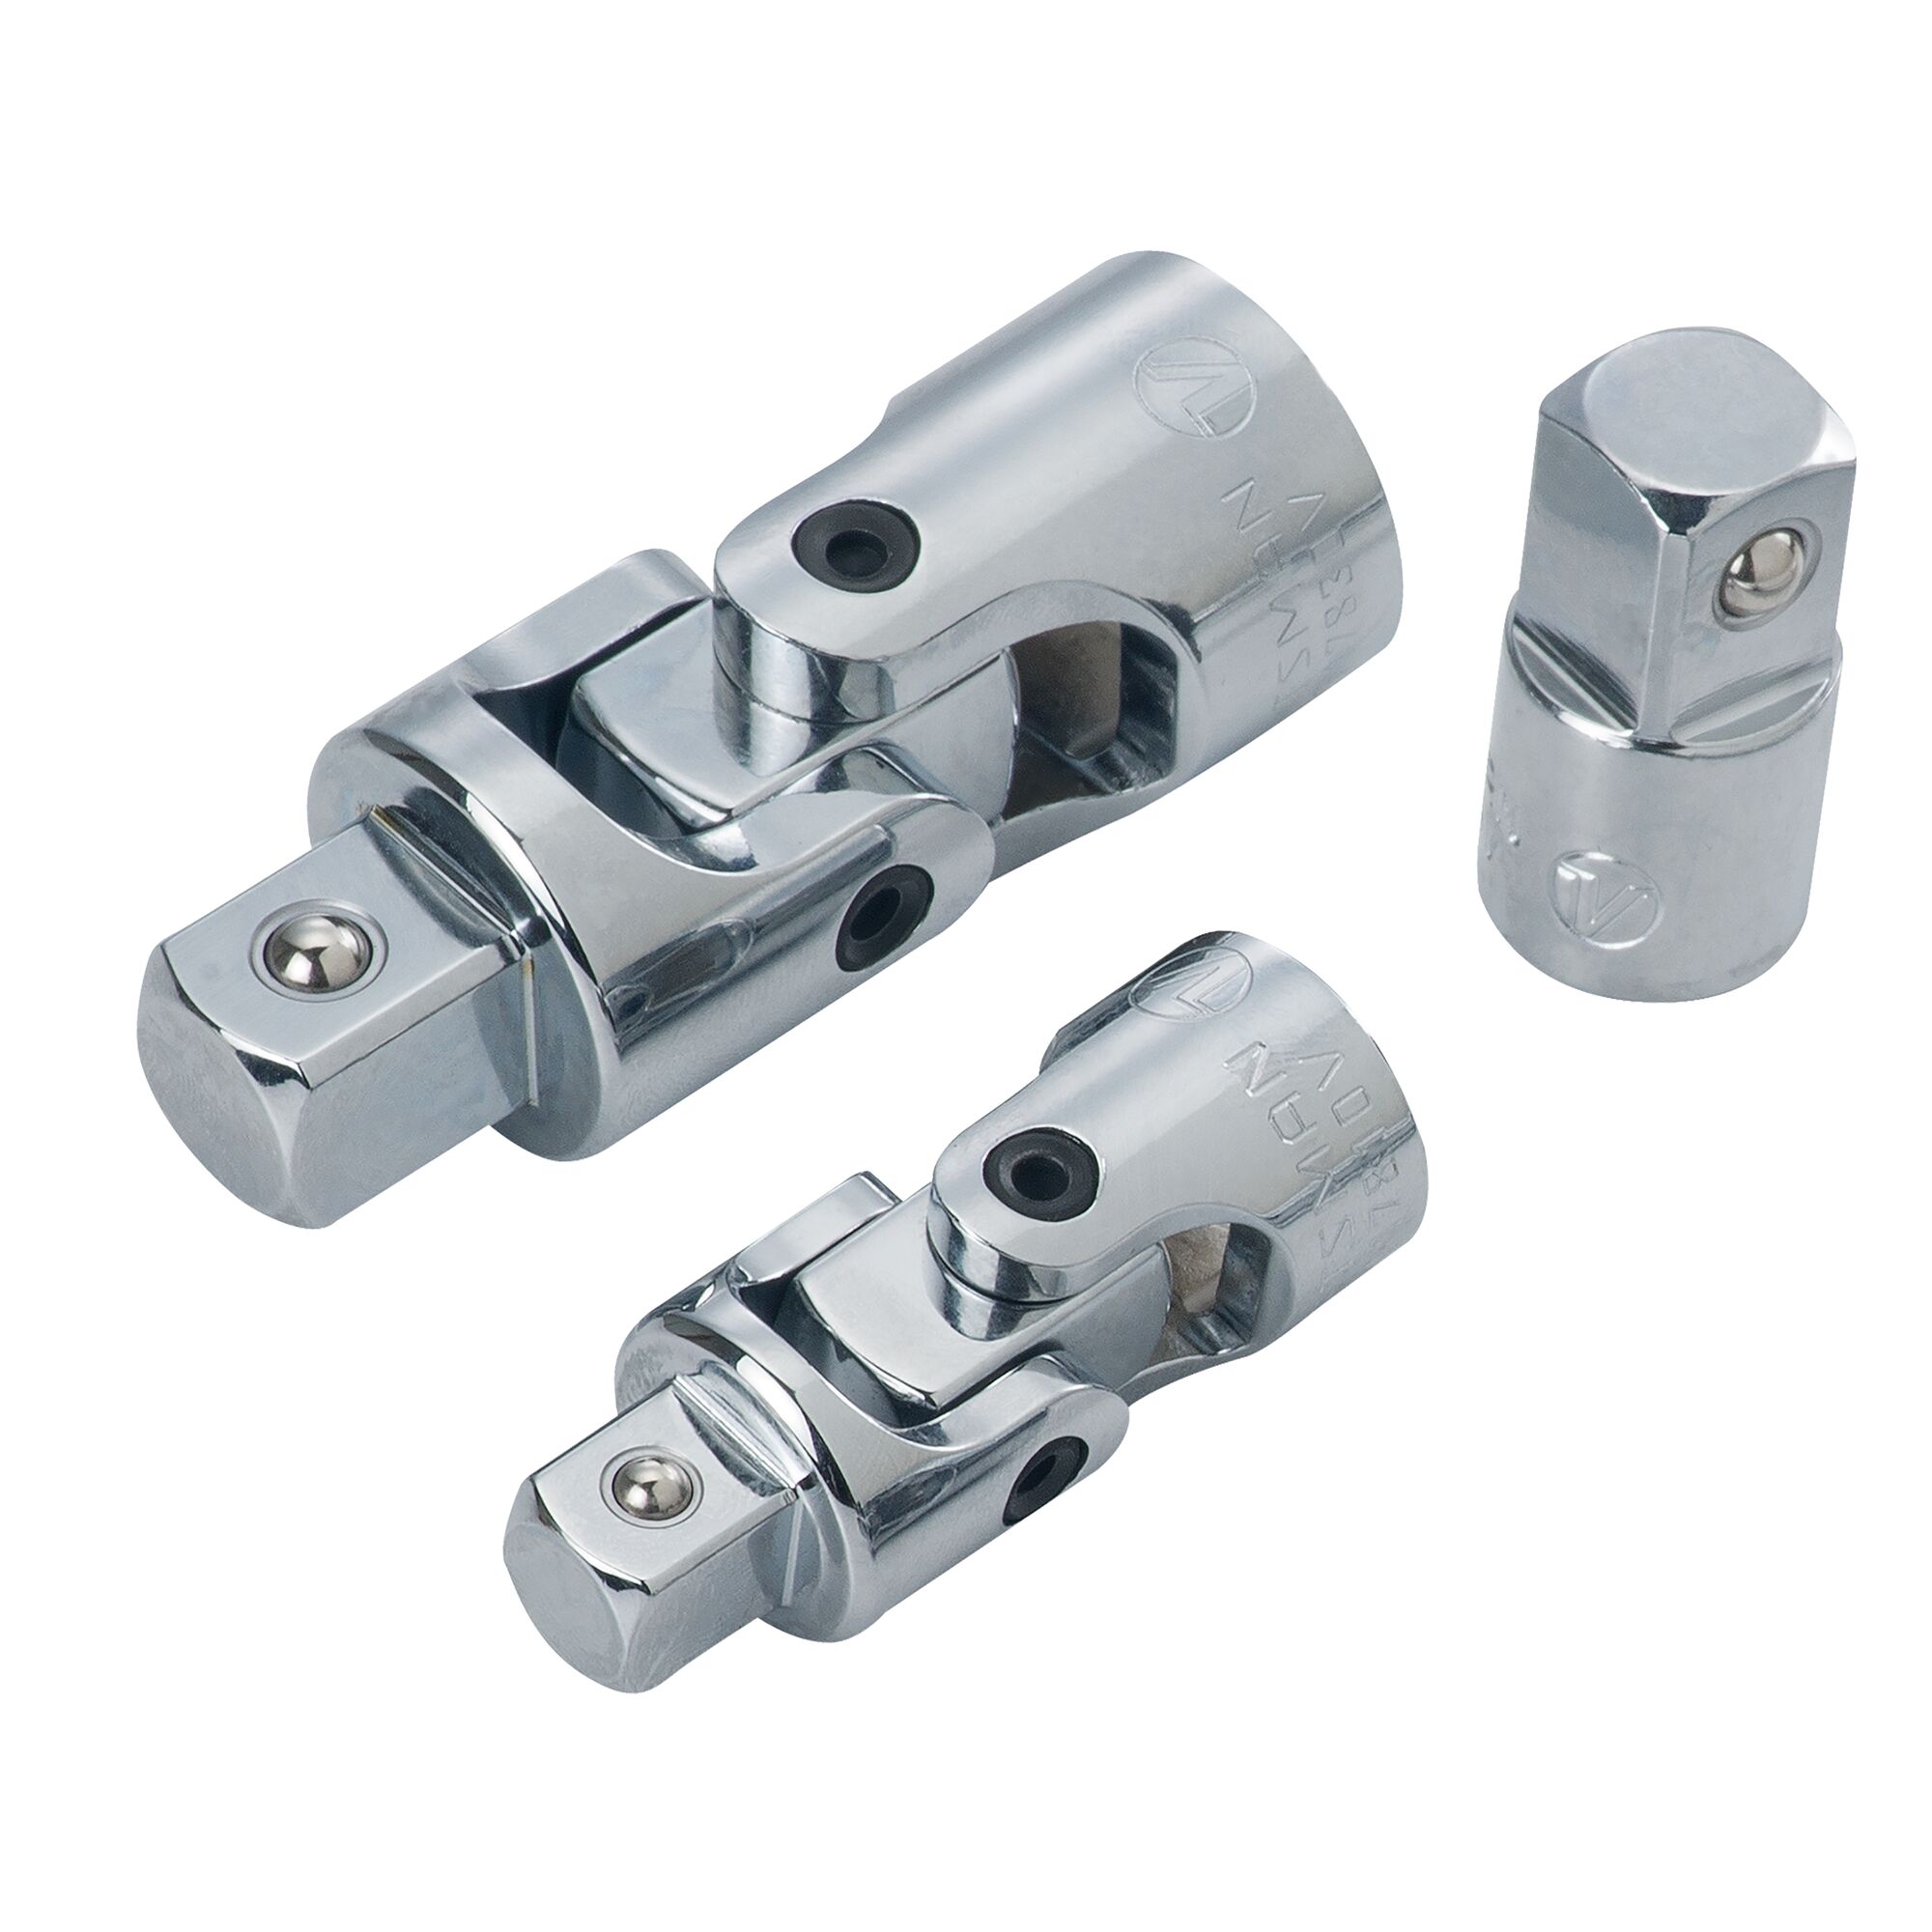 View of CRAFTSMAN Sockets: Bit Sockets highlighting product features